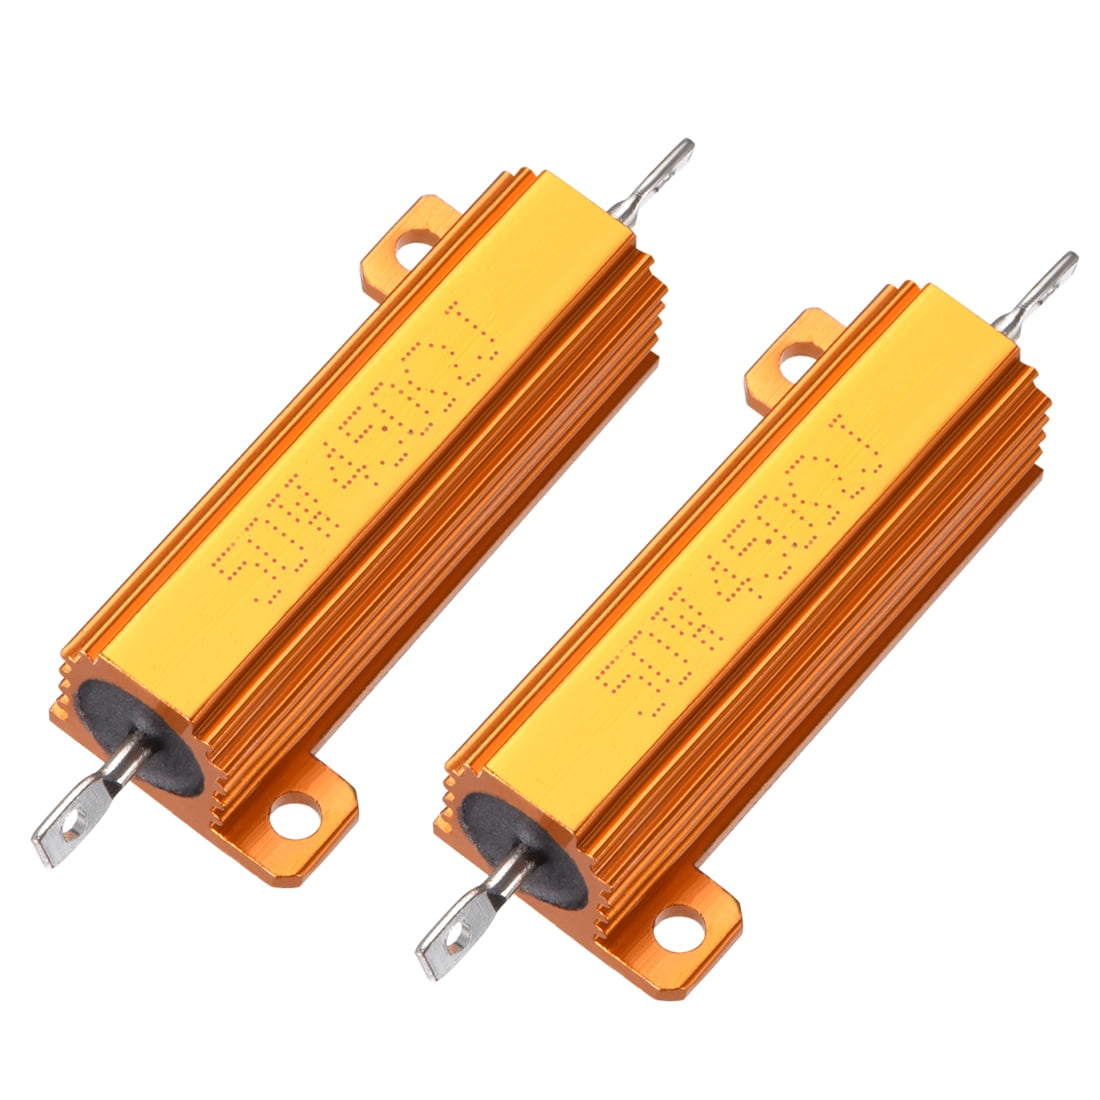 Binglinghua 90 Ohm 100W Watt 5% Chassis Power Aluminum Housed Case Wirewound Resistor,Pack of 5